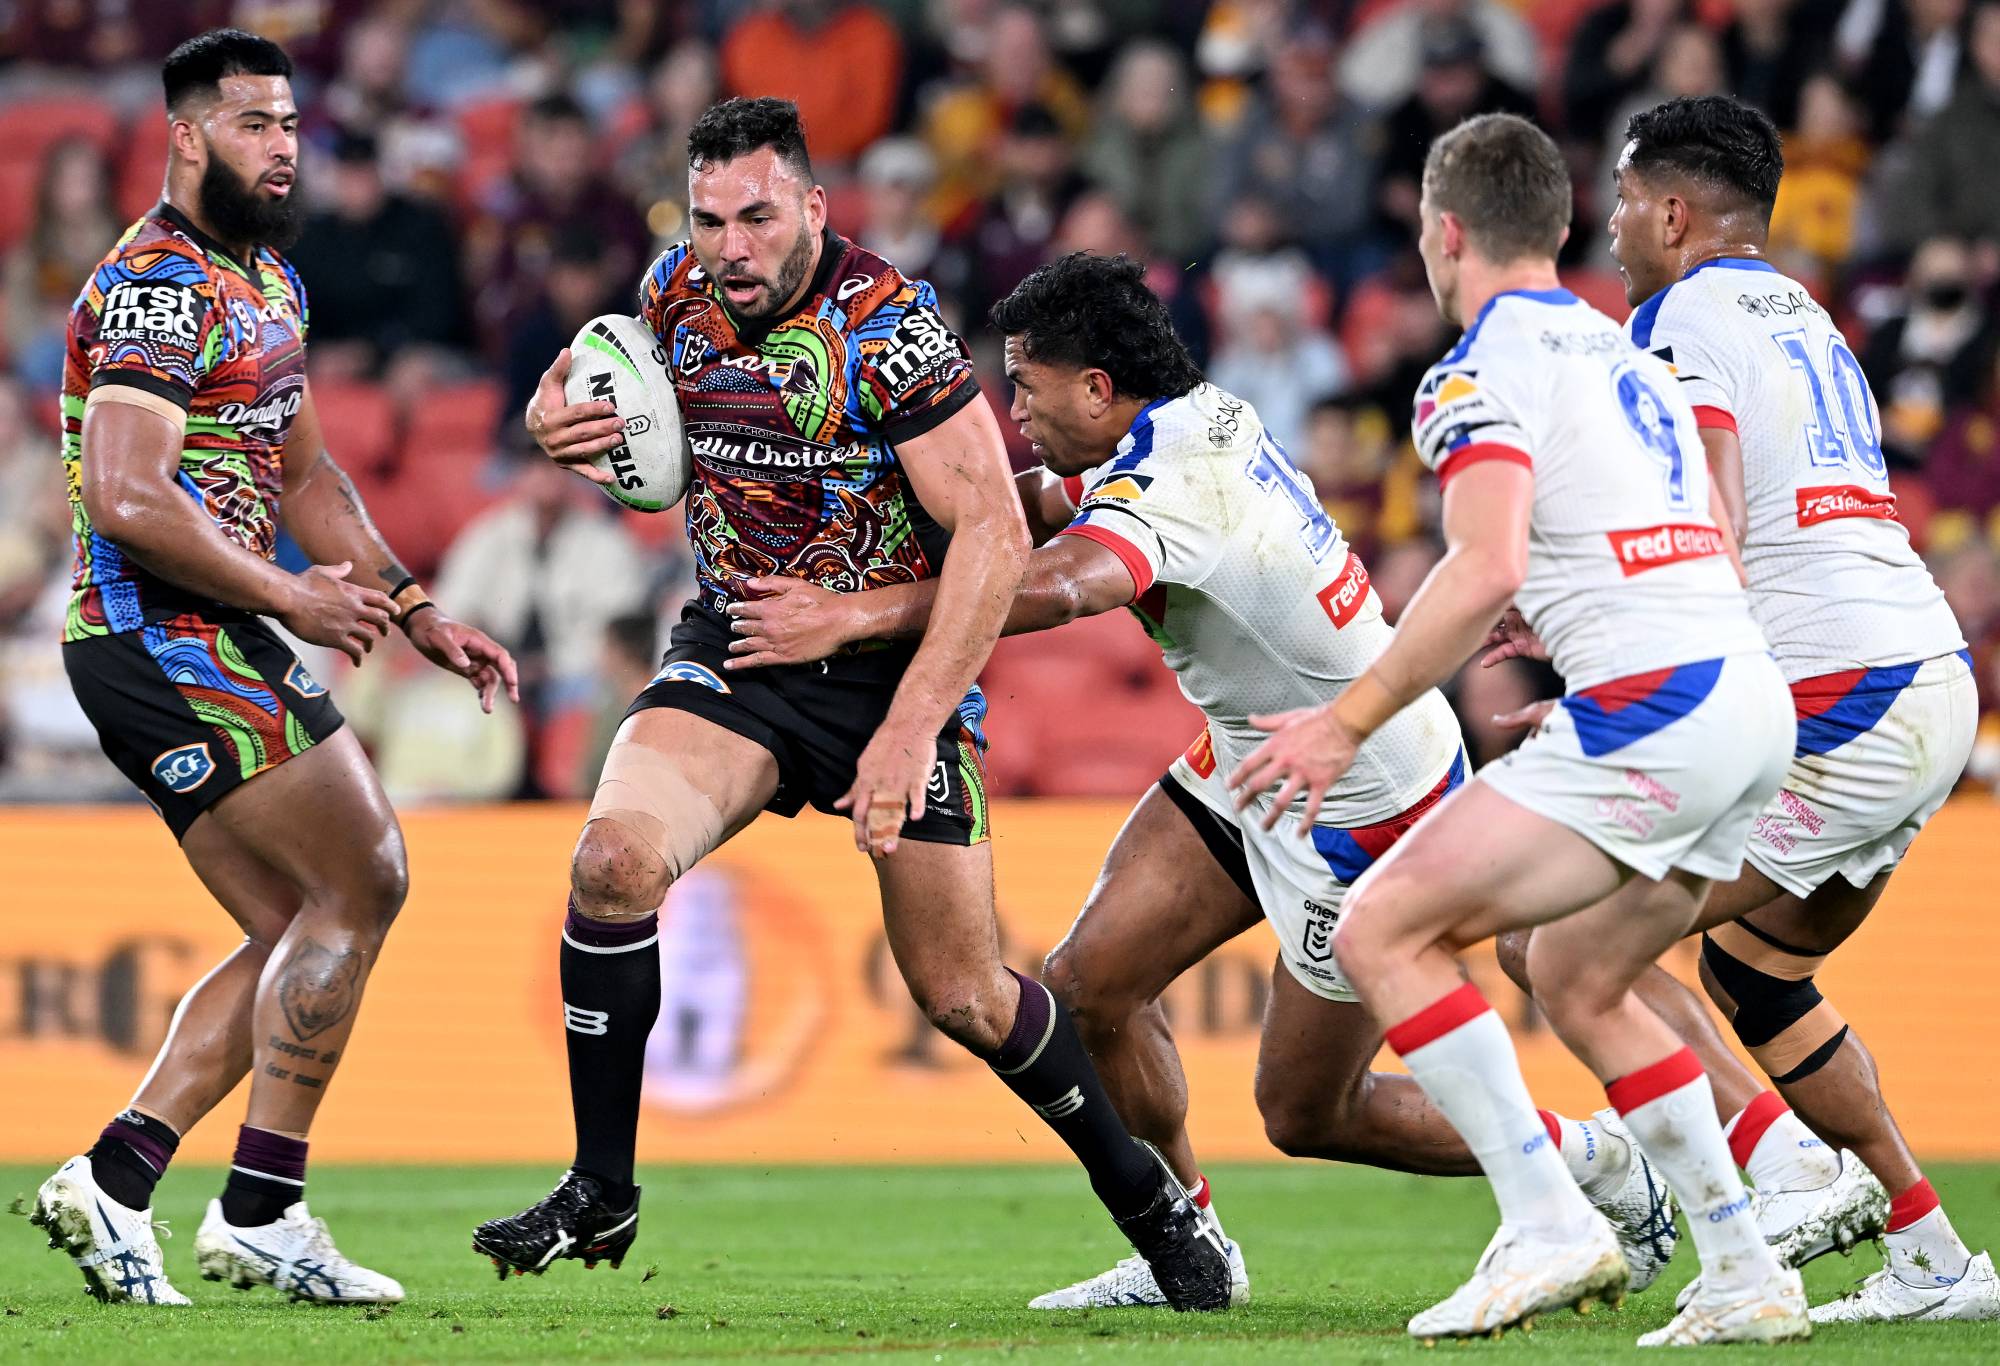 BRISBANE, AUSTRALIA - AUGUST 13: Ryan James of the Broncos attempts to break away from the defence during the round 22 NRL match between the Brisbane Broncos and the Newcastle Knights at Suncorp Stadium, on August 13, 2022, in Brisbane, Australia. (Photo by Bradley Kanaris/Getty Images)